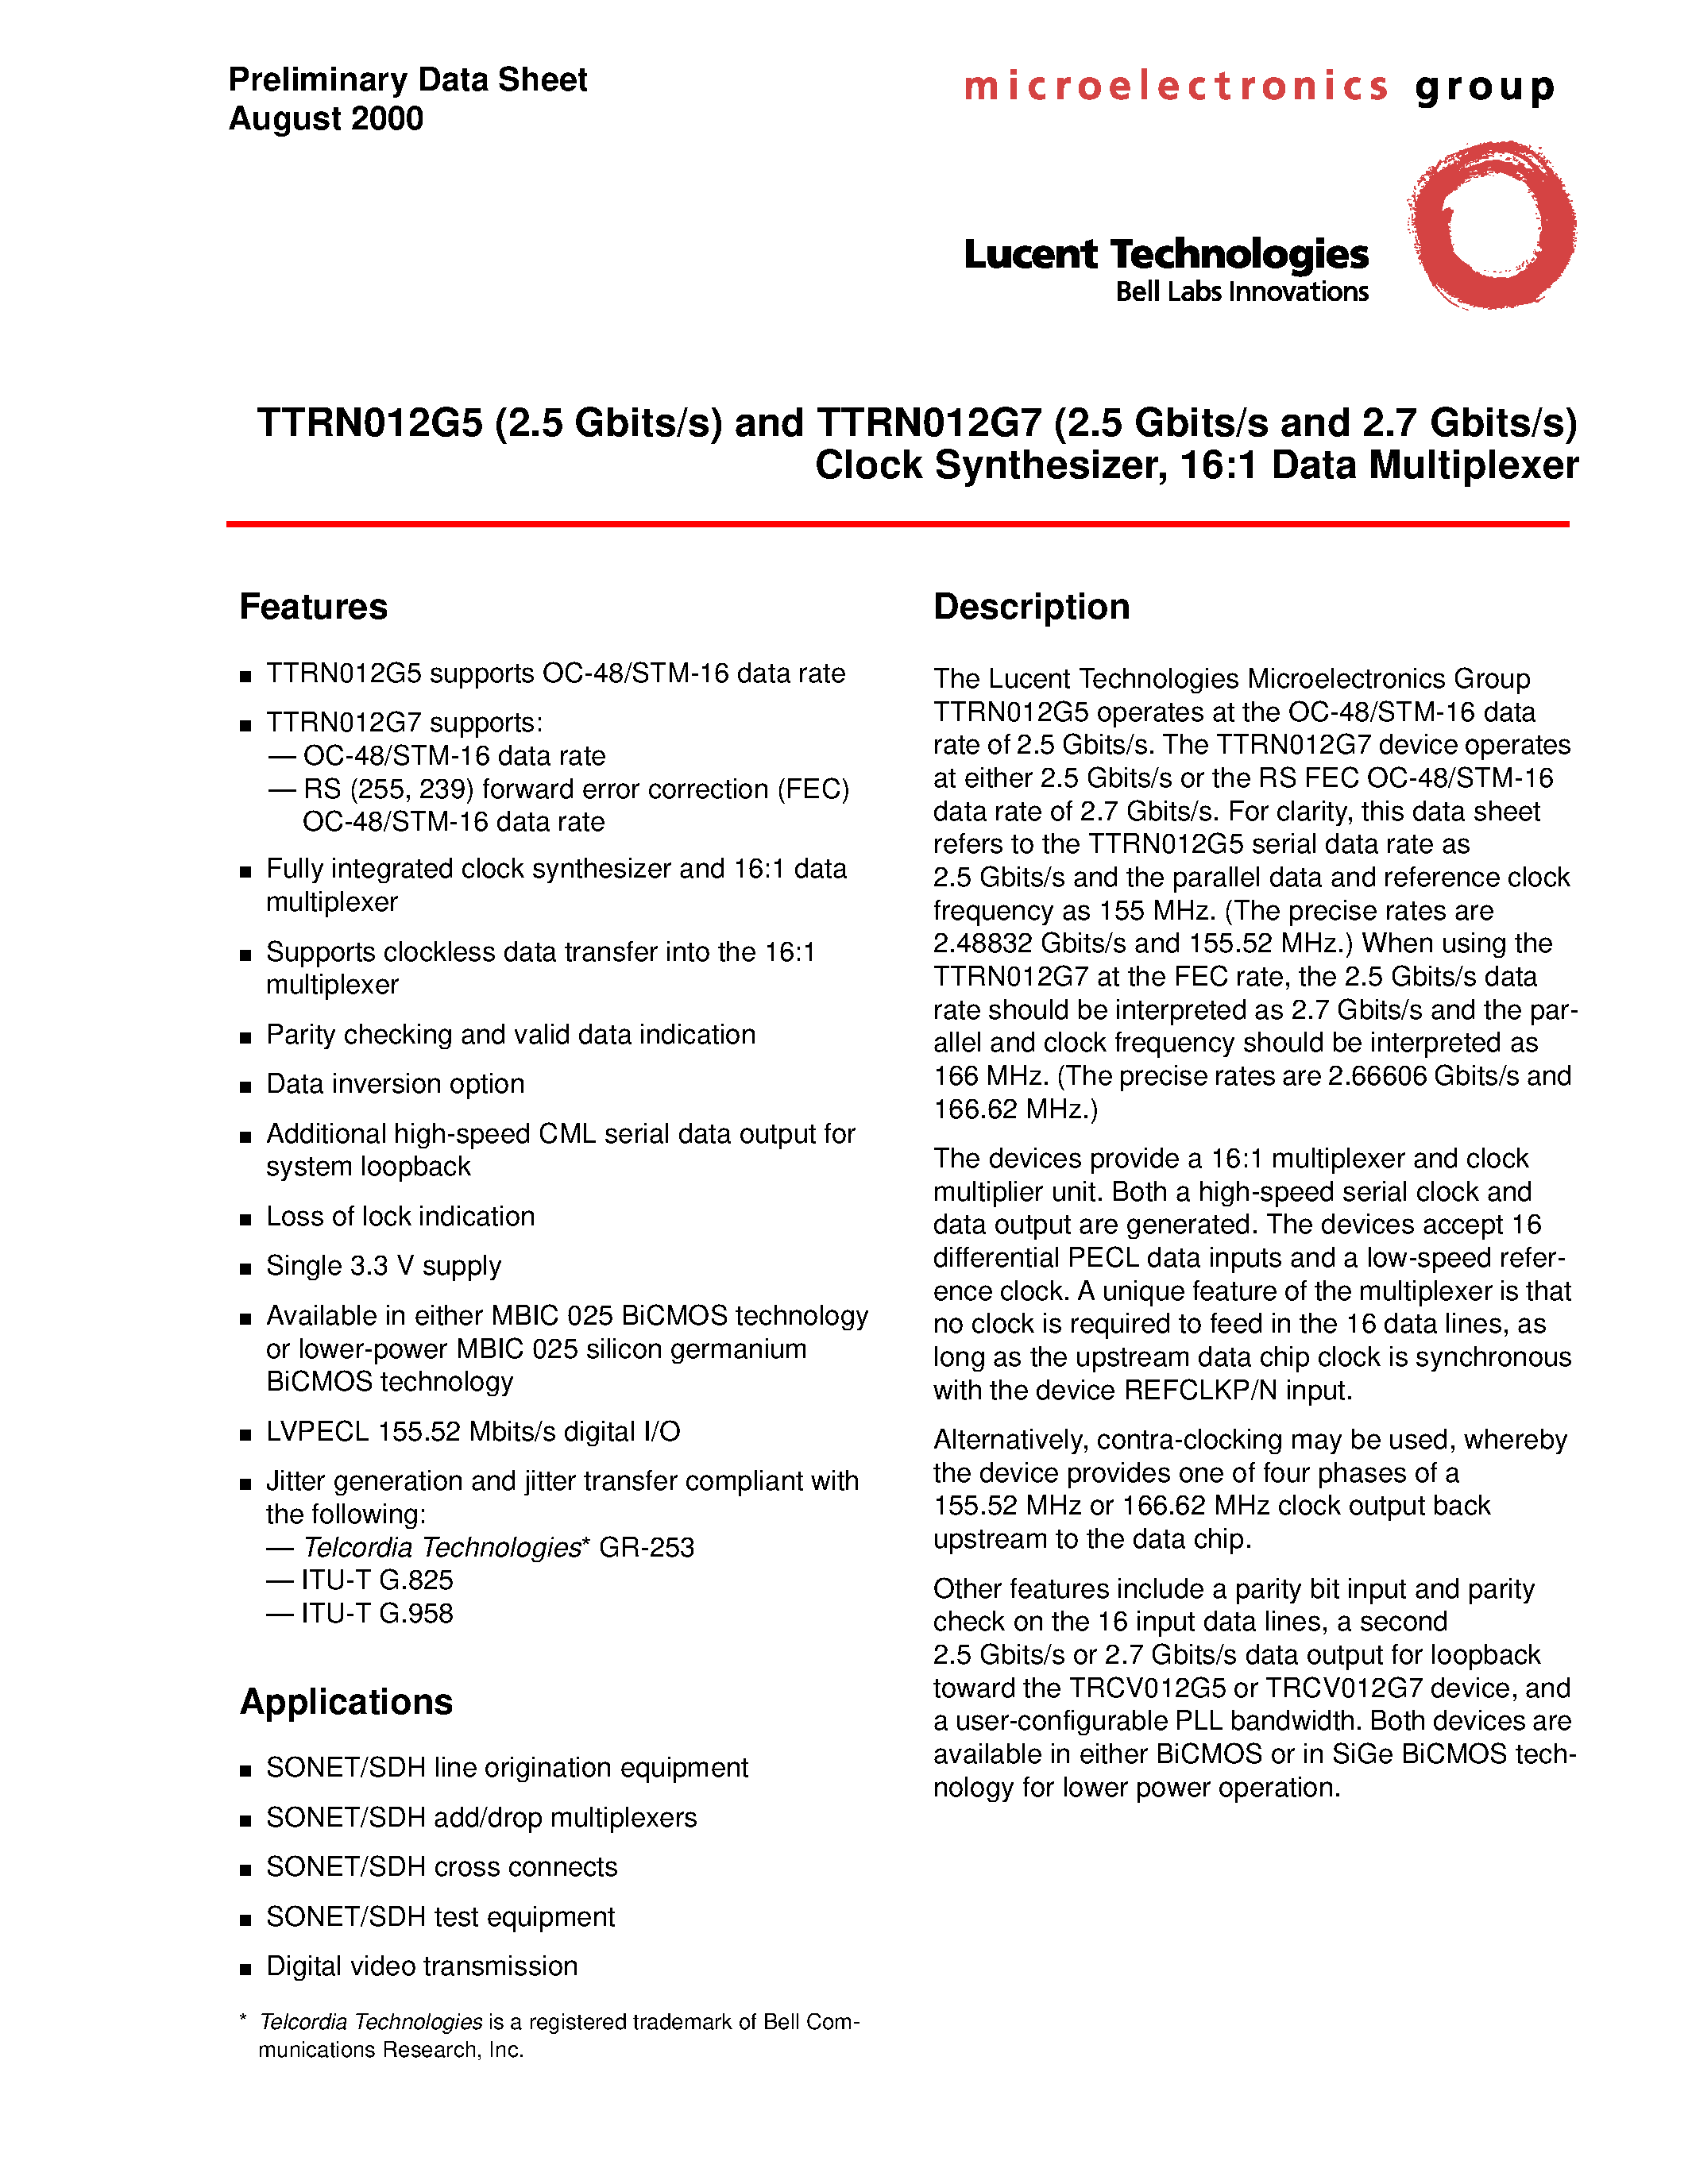 Datasheet TTRN012G73XE1 - TTRN012G5 (2.5 Gbits/s) and TTRN012G7 (2.5 Gbits/s and 2.7 Gbits/s) Clock Synthesizer/ 16:1 Data Multiplexer page 1